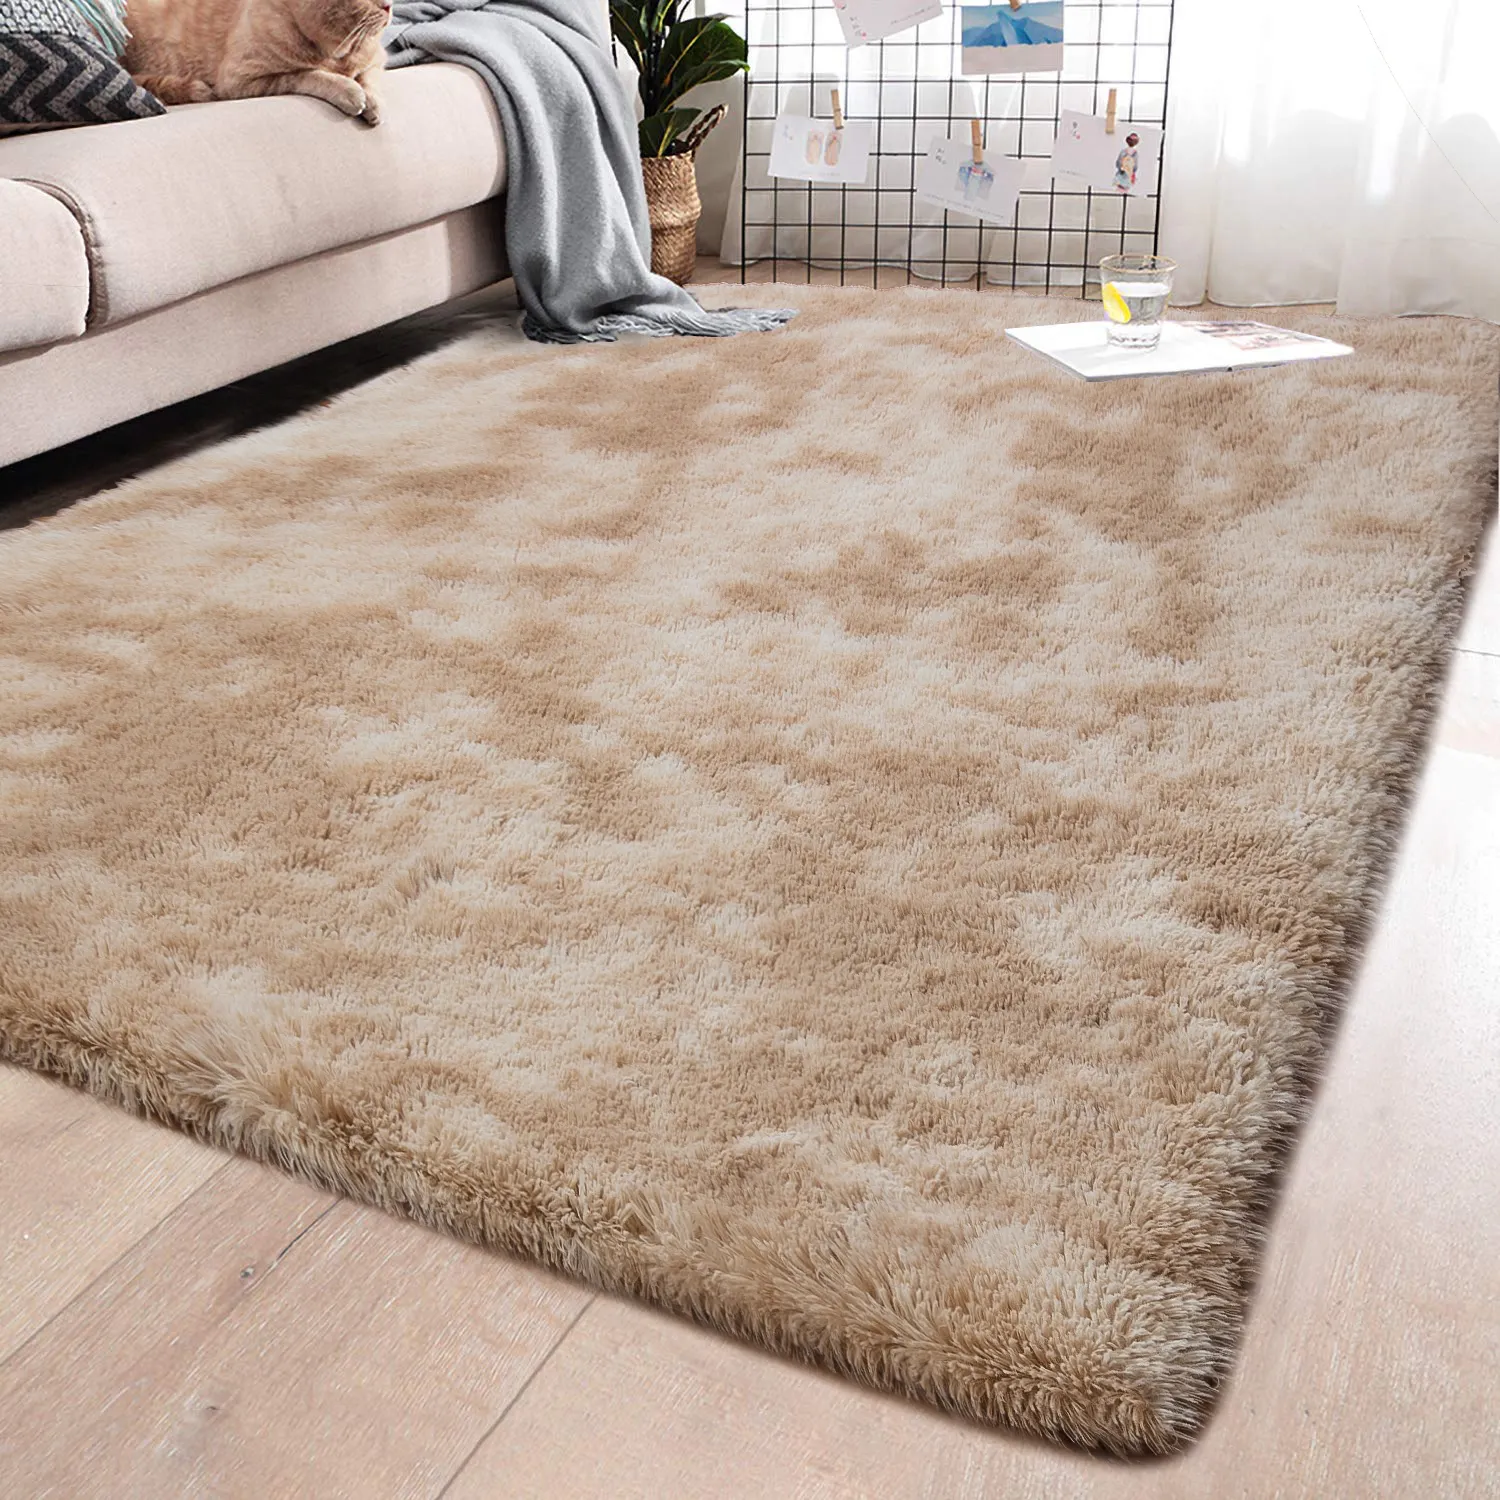 furry rug stain treatment for everyday use at home